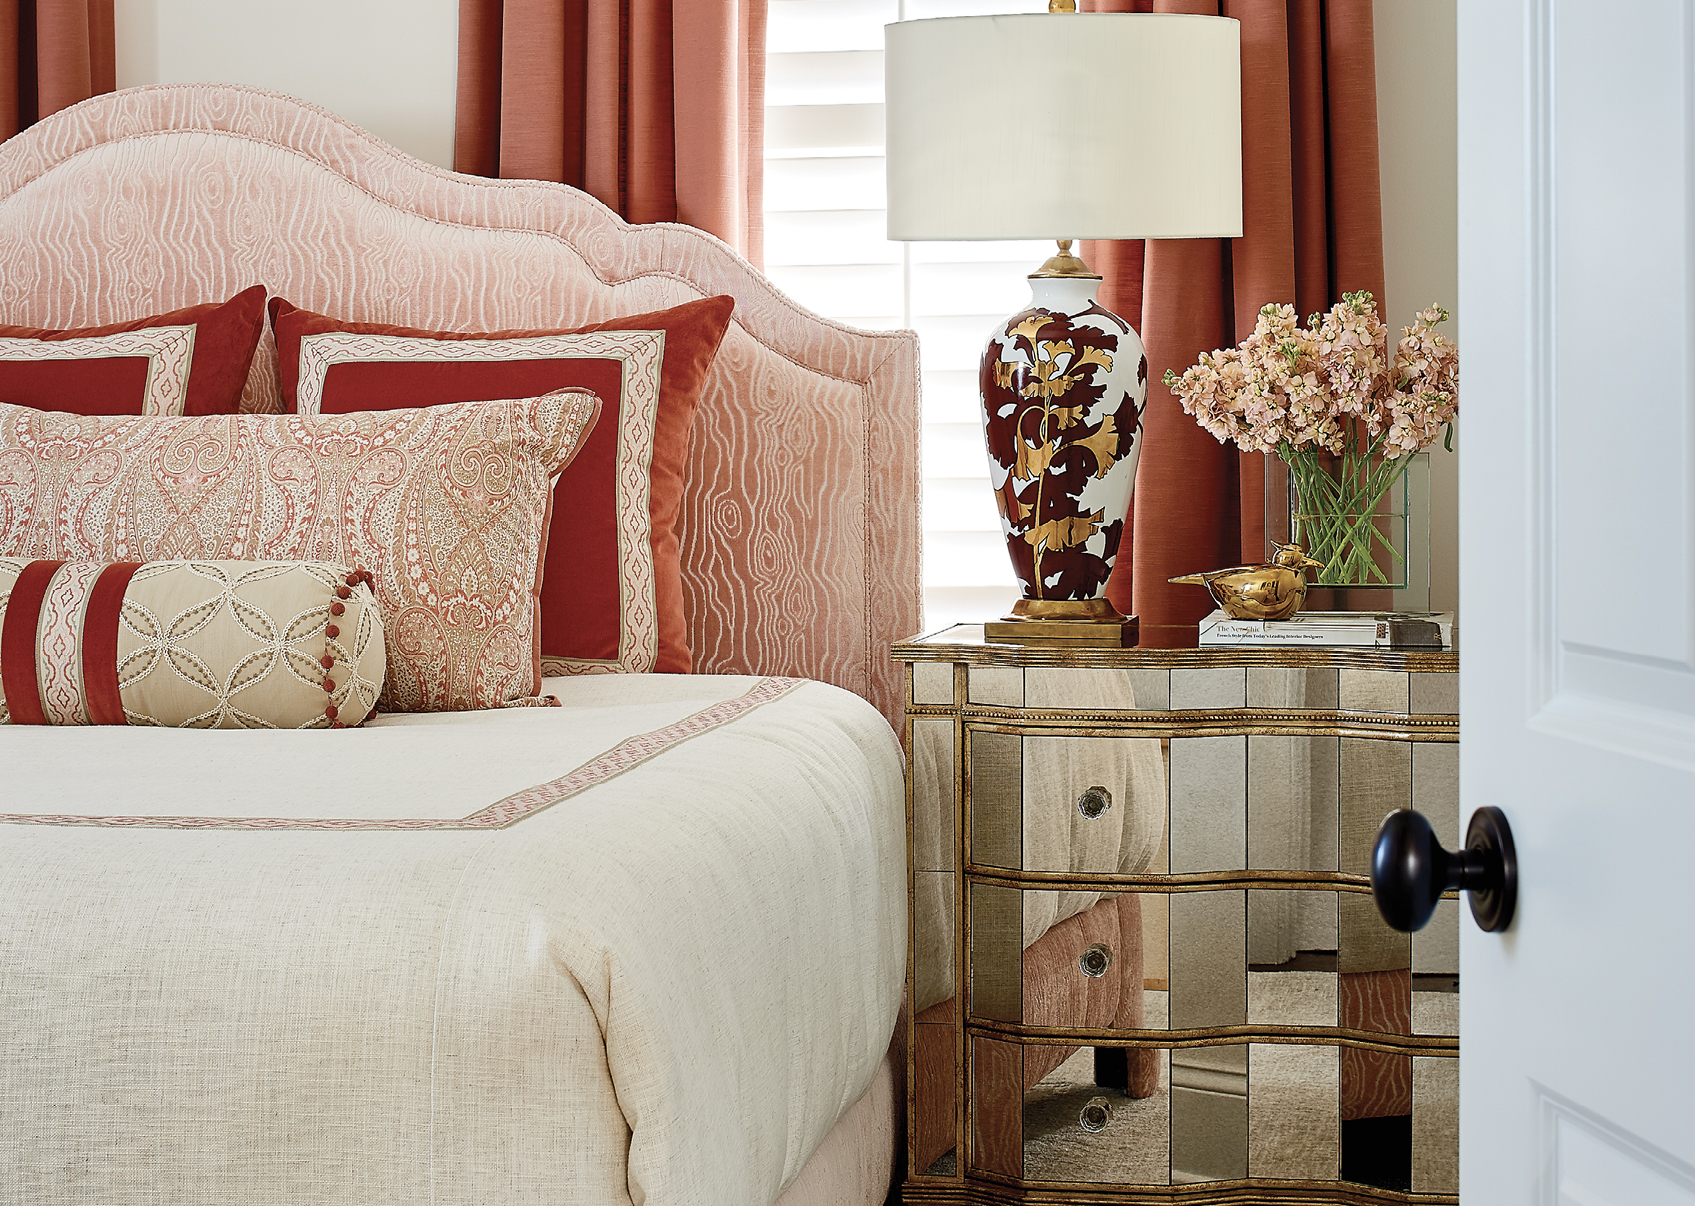 In contrast, the guest bedroom is a cacophony of cheerful colors, with deep peach drapes, a mirrored antique nightstand, and an elegant gold and crimson lamp from Currey and Company.